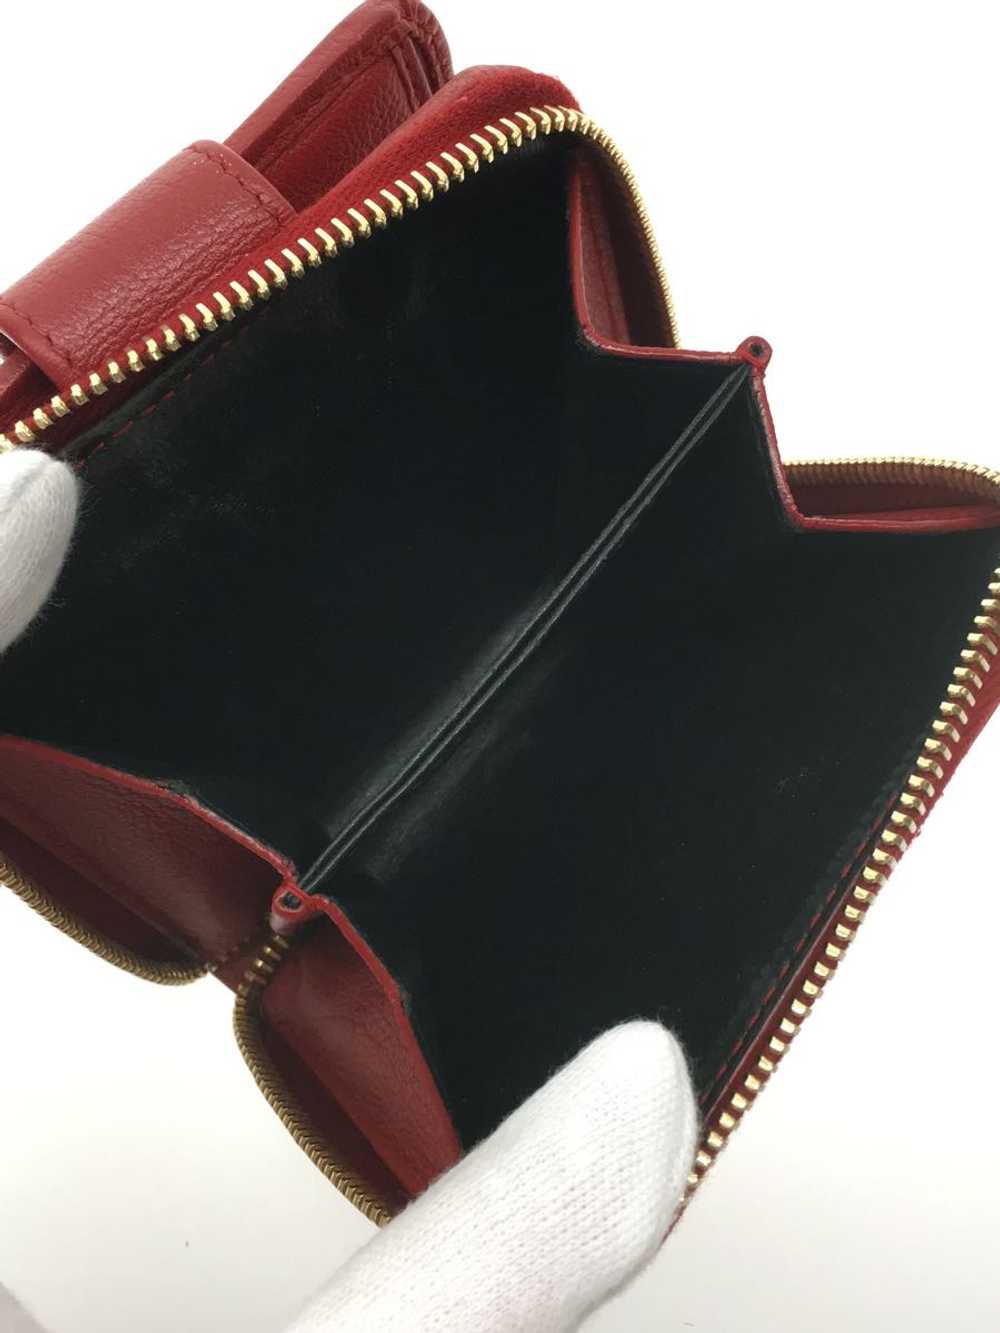 Yves Saint Laurent Bifold Wallet Leather Red Plai… - image 5